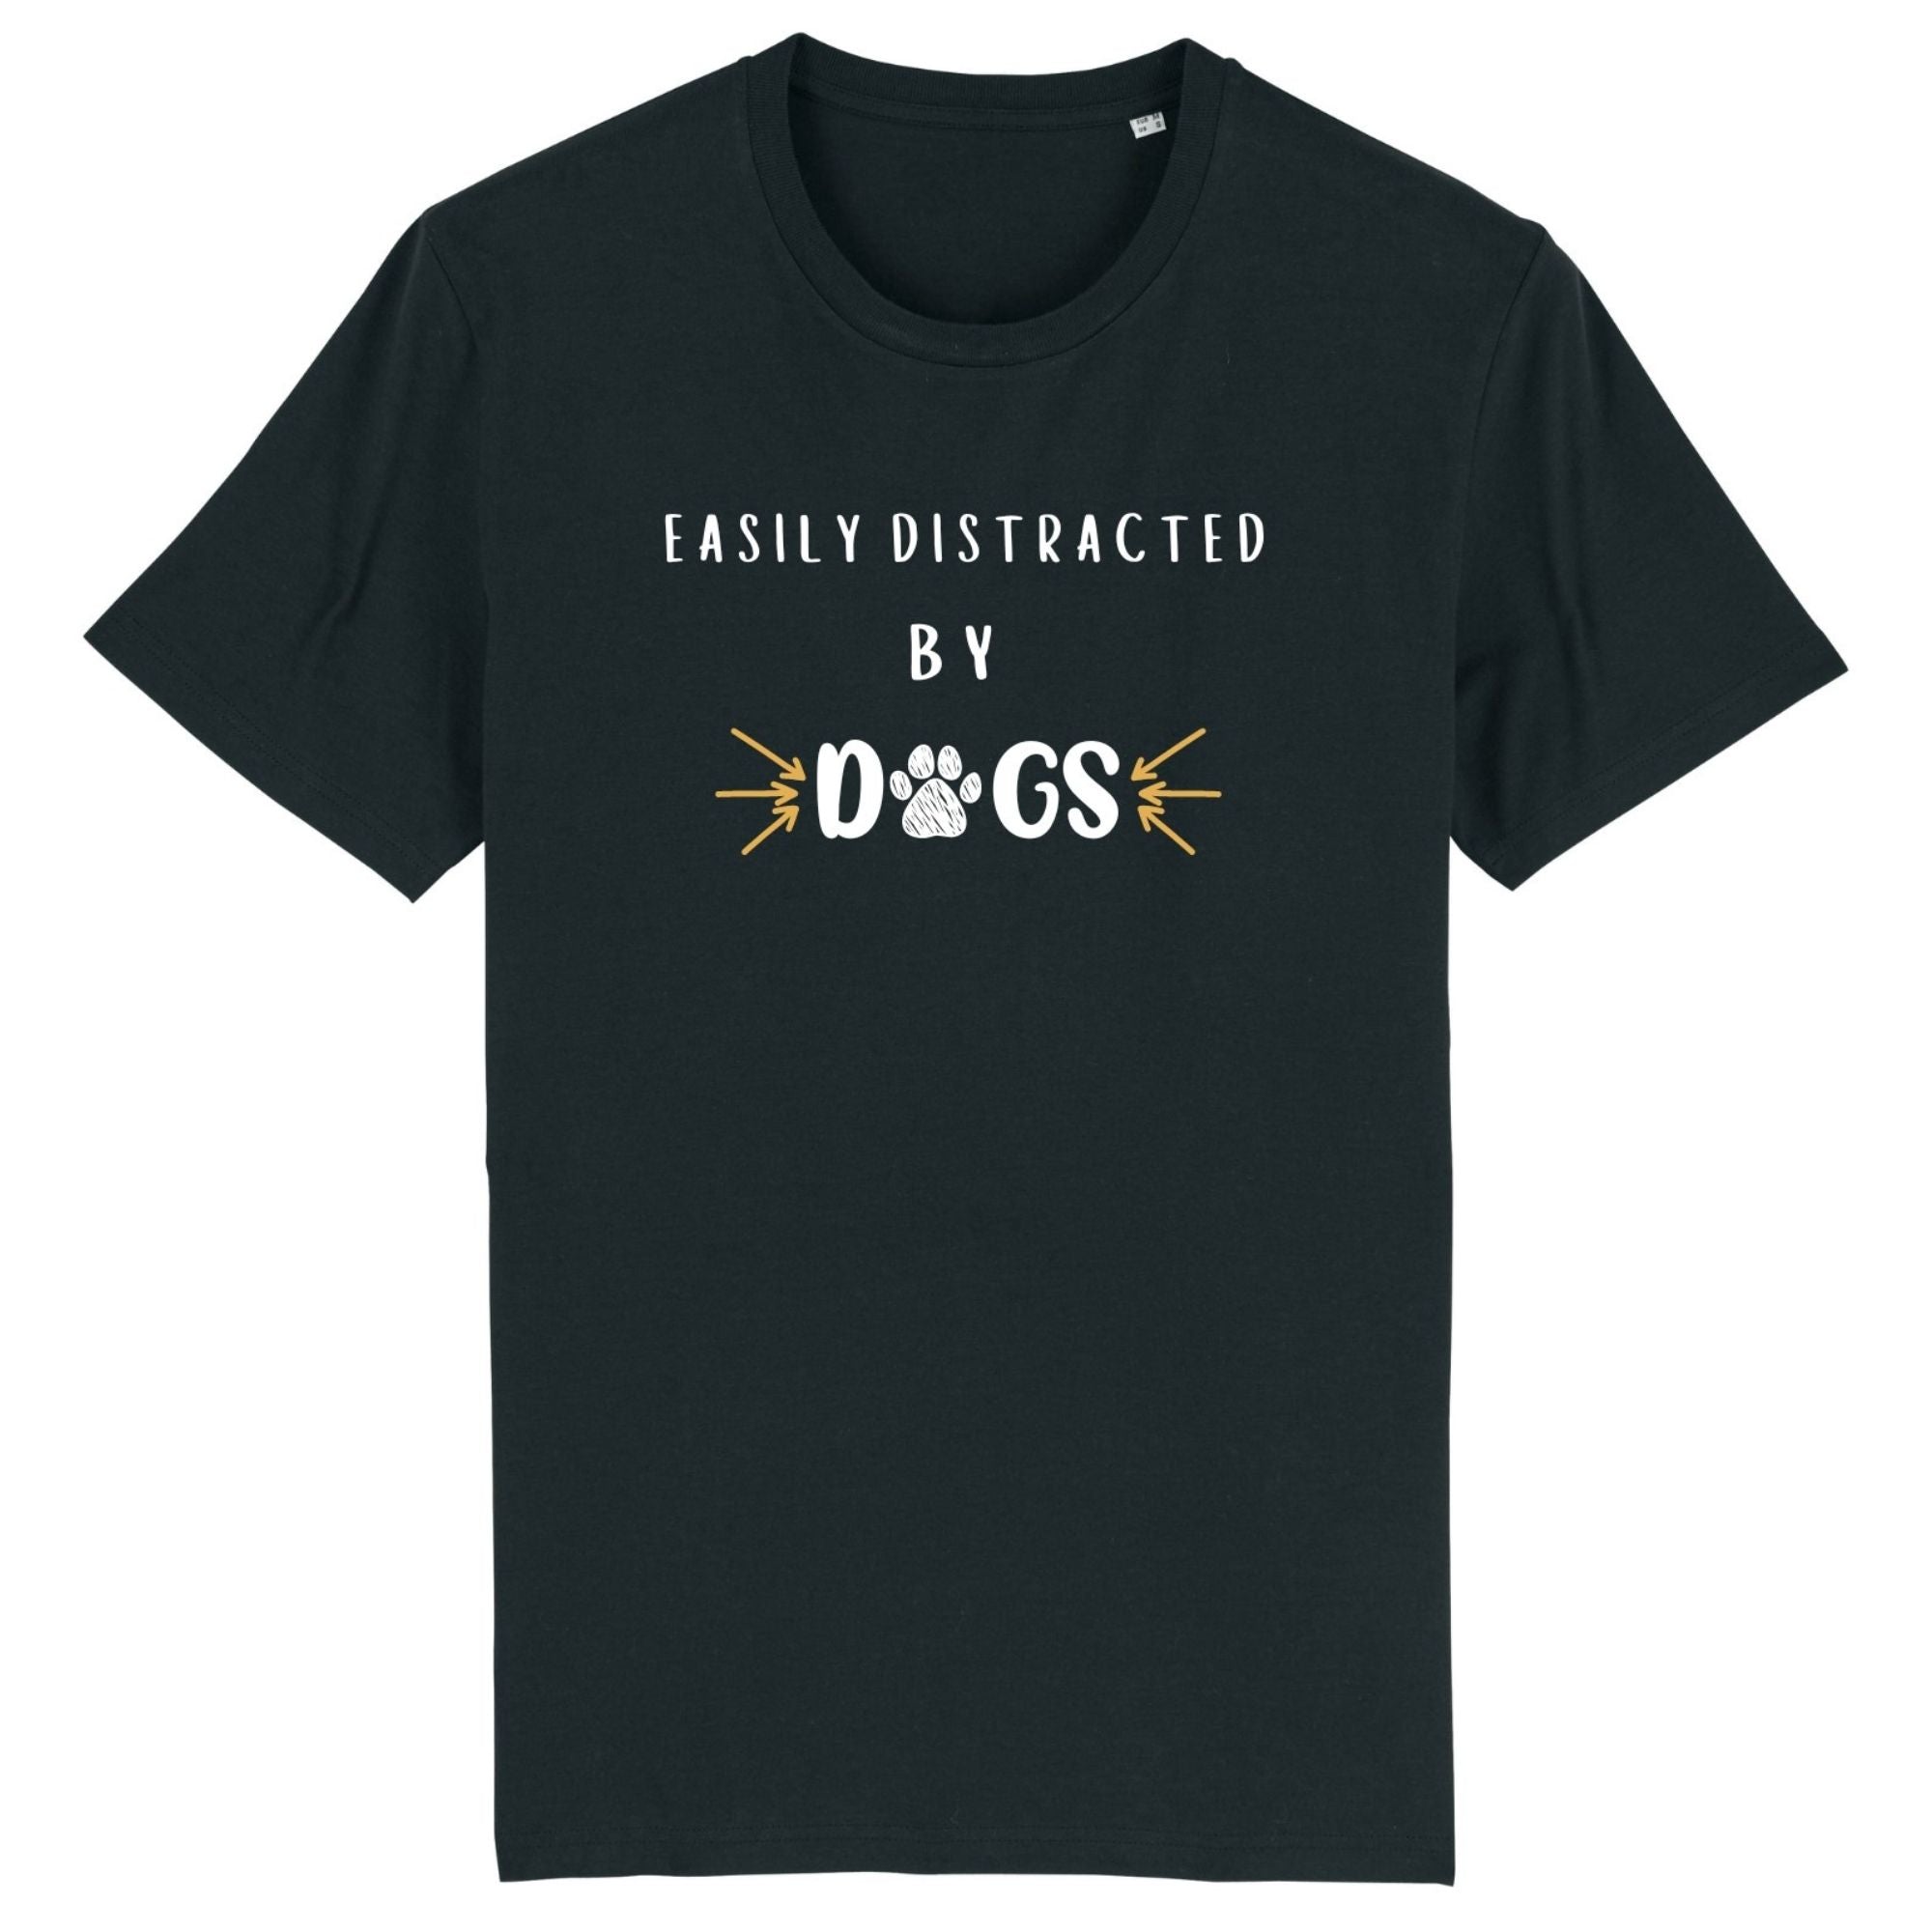 Easily Distracted by Dogs Organic T-Shirt - Sweetie